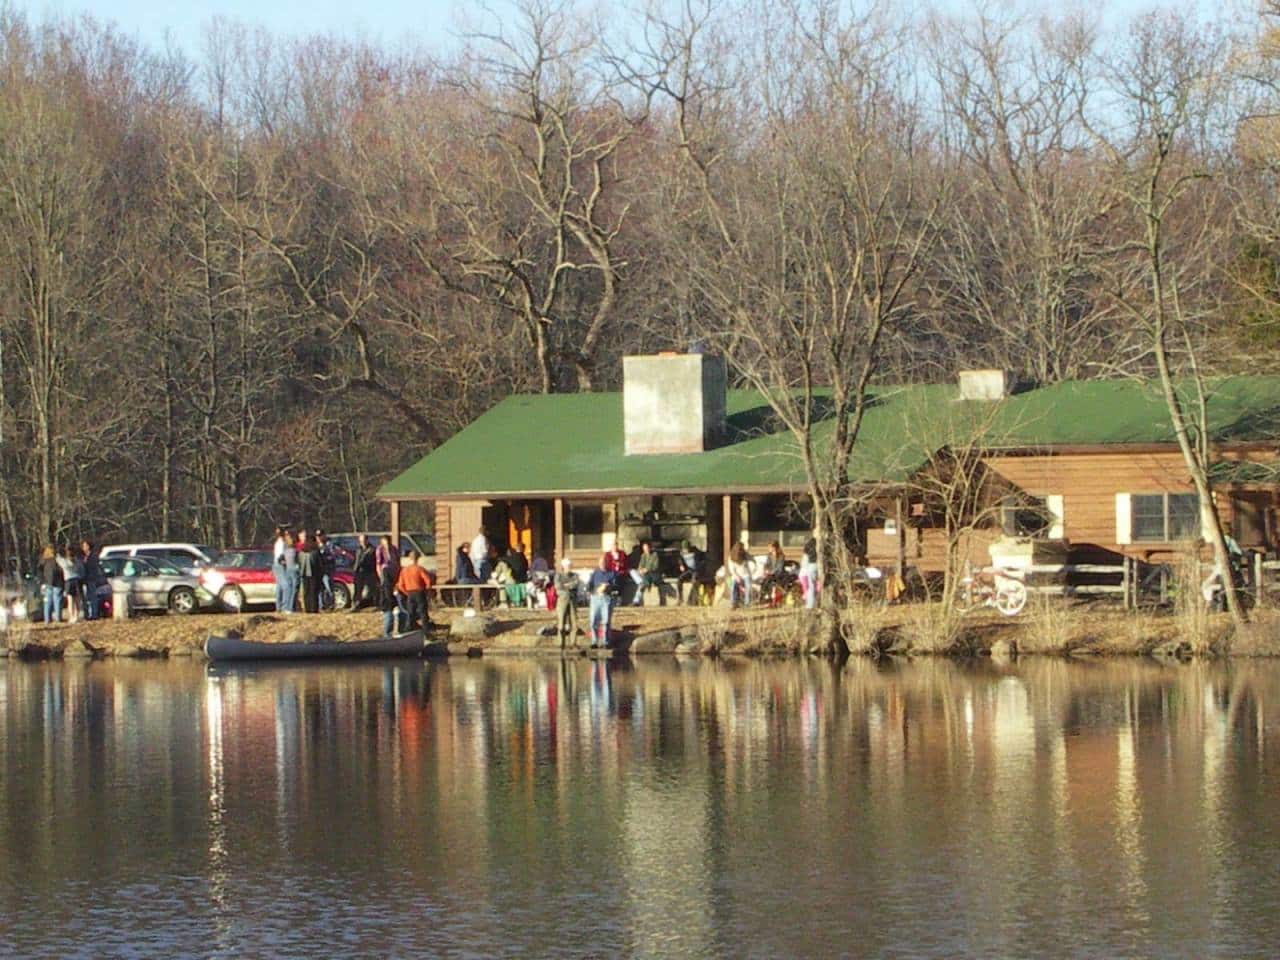 The Closter Nature Center is holding a hike through the forest during the evening of March 12.